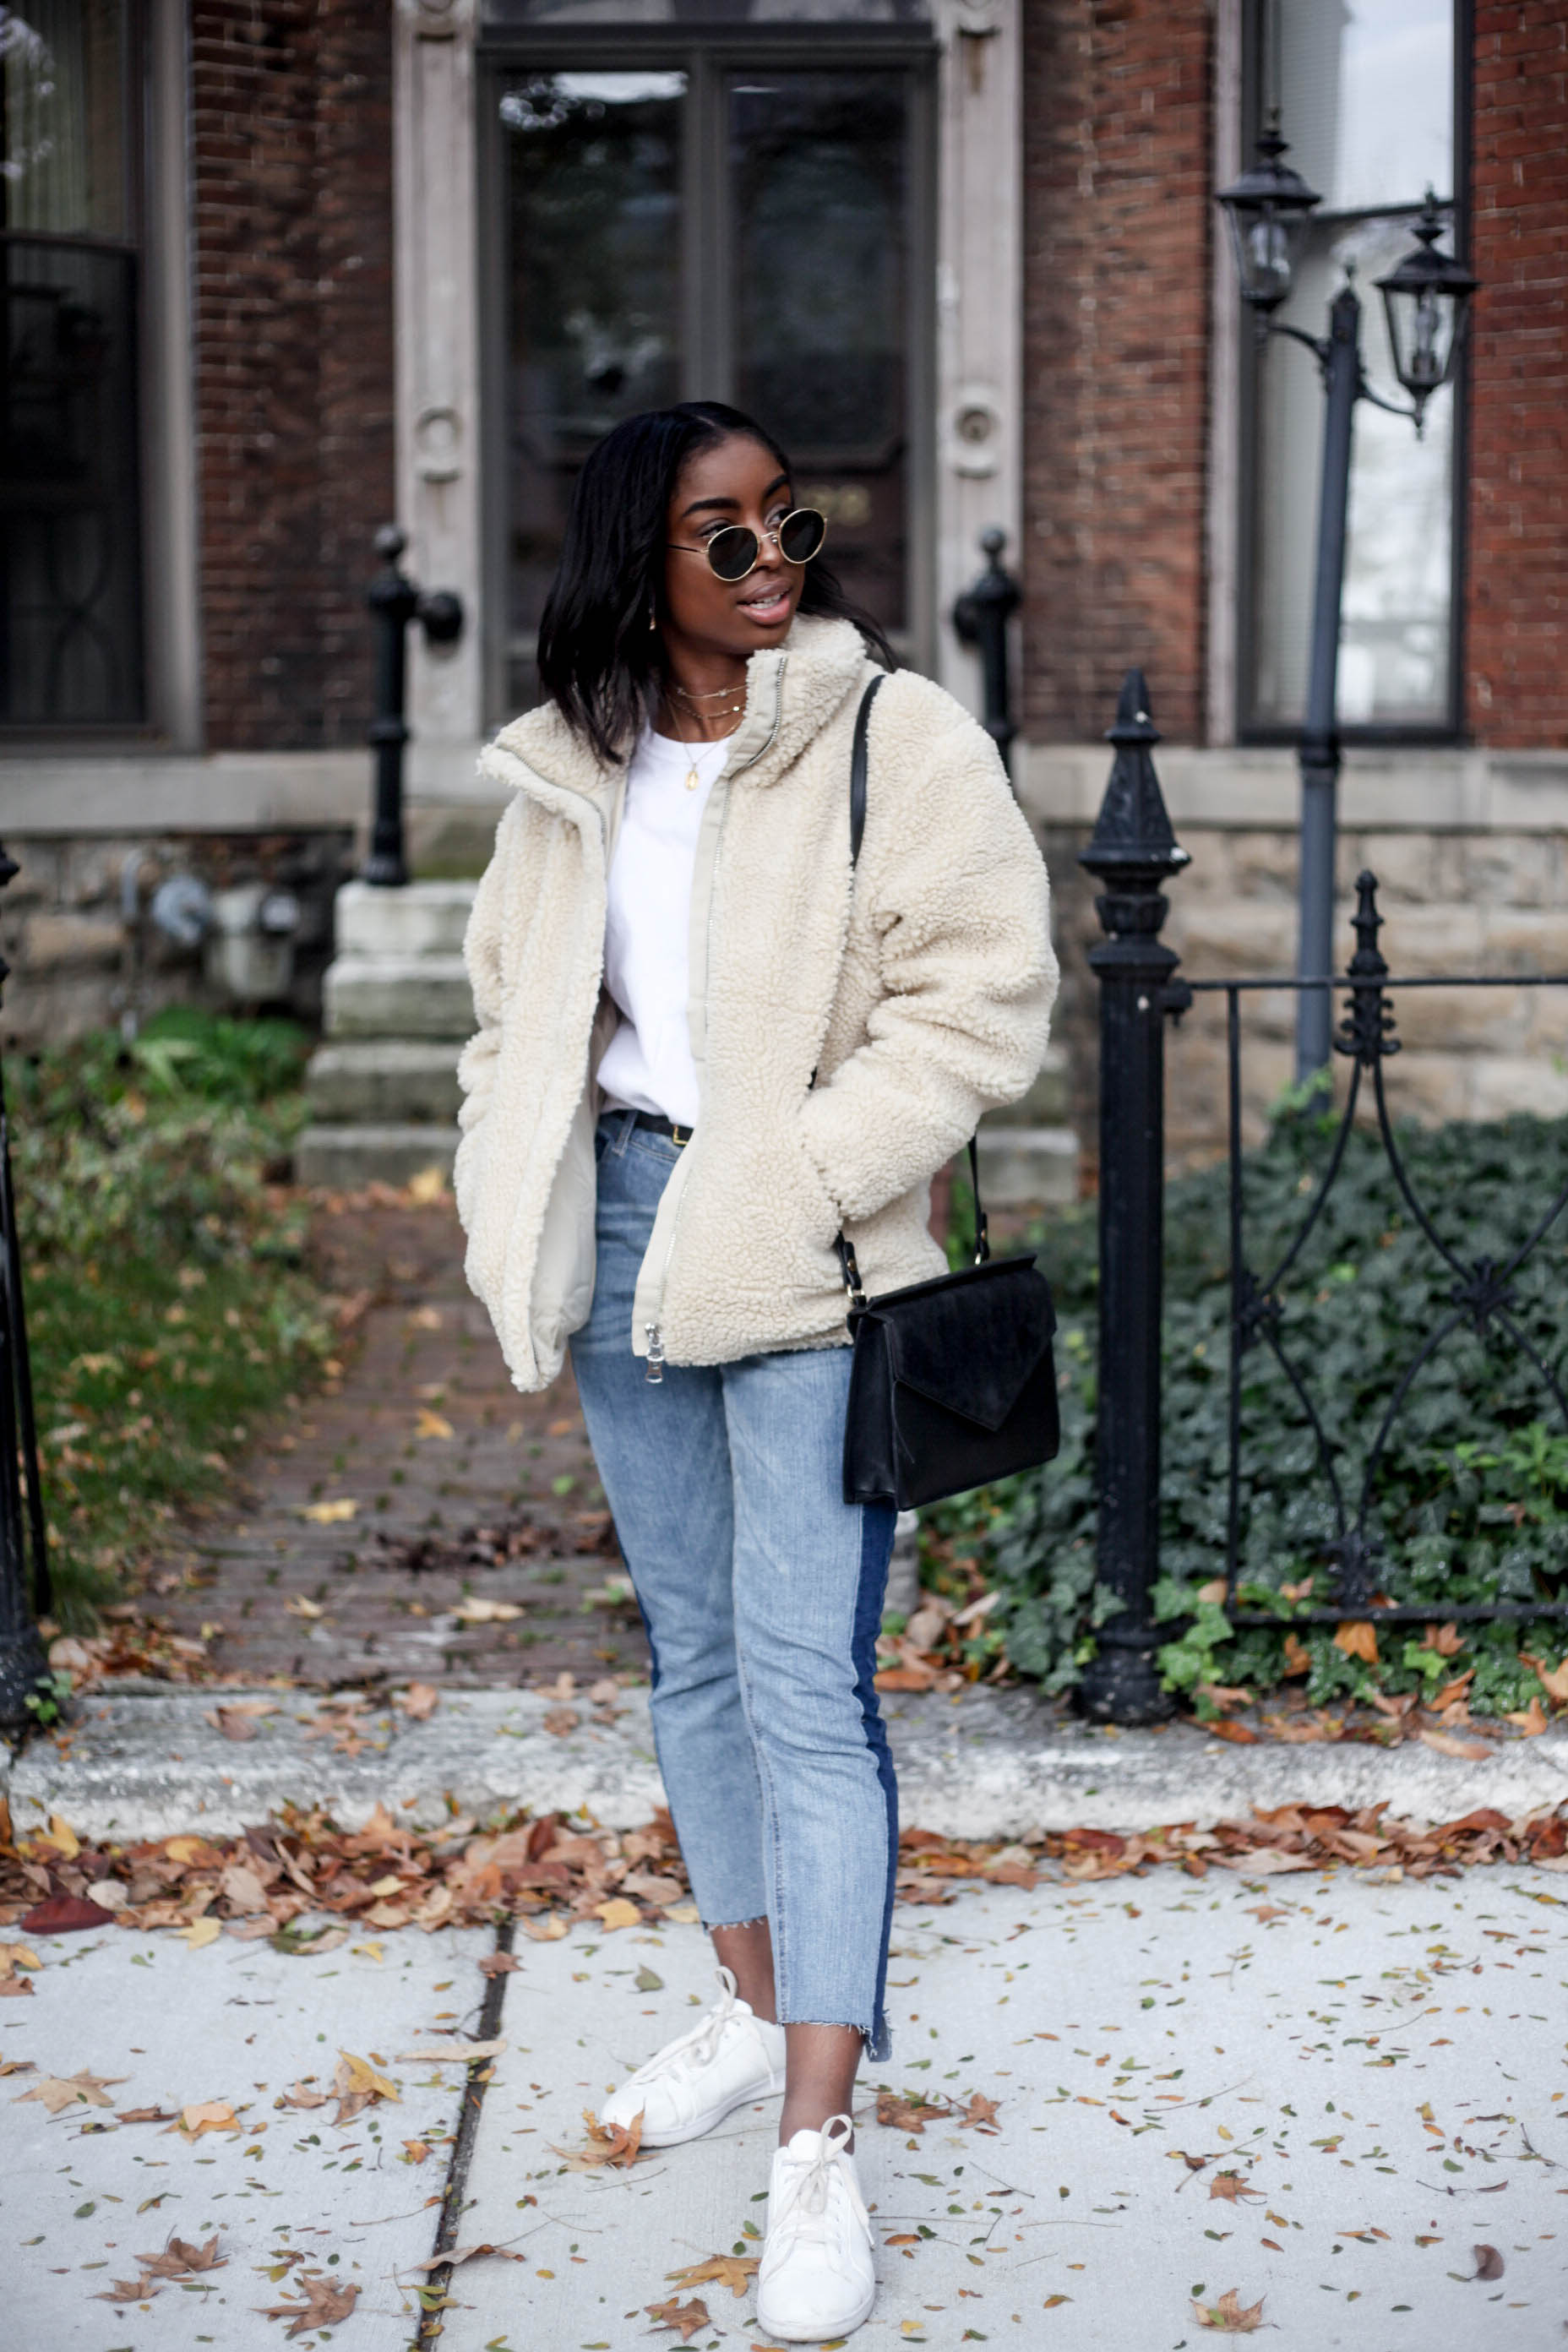 What's everyone's thoughts about the Shearling/Sherpa trend for